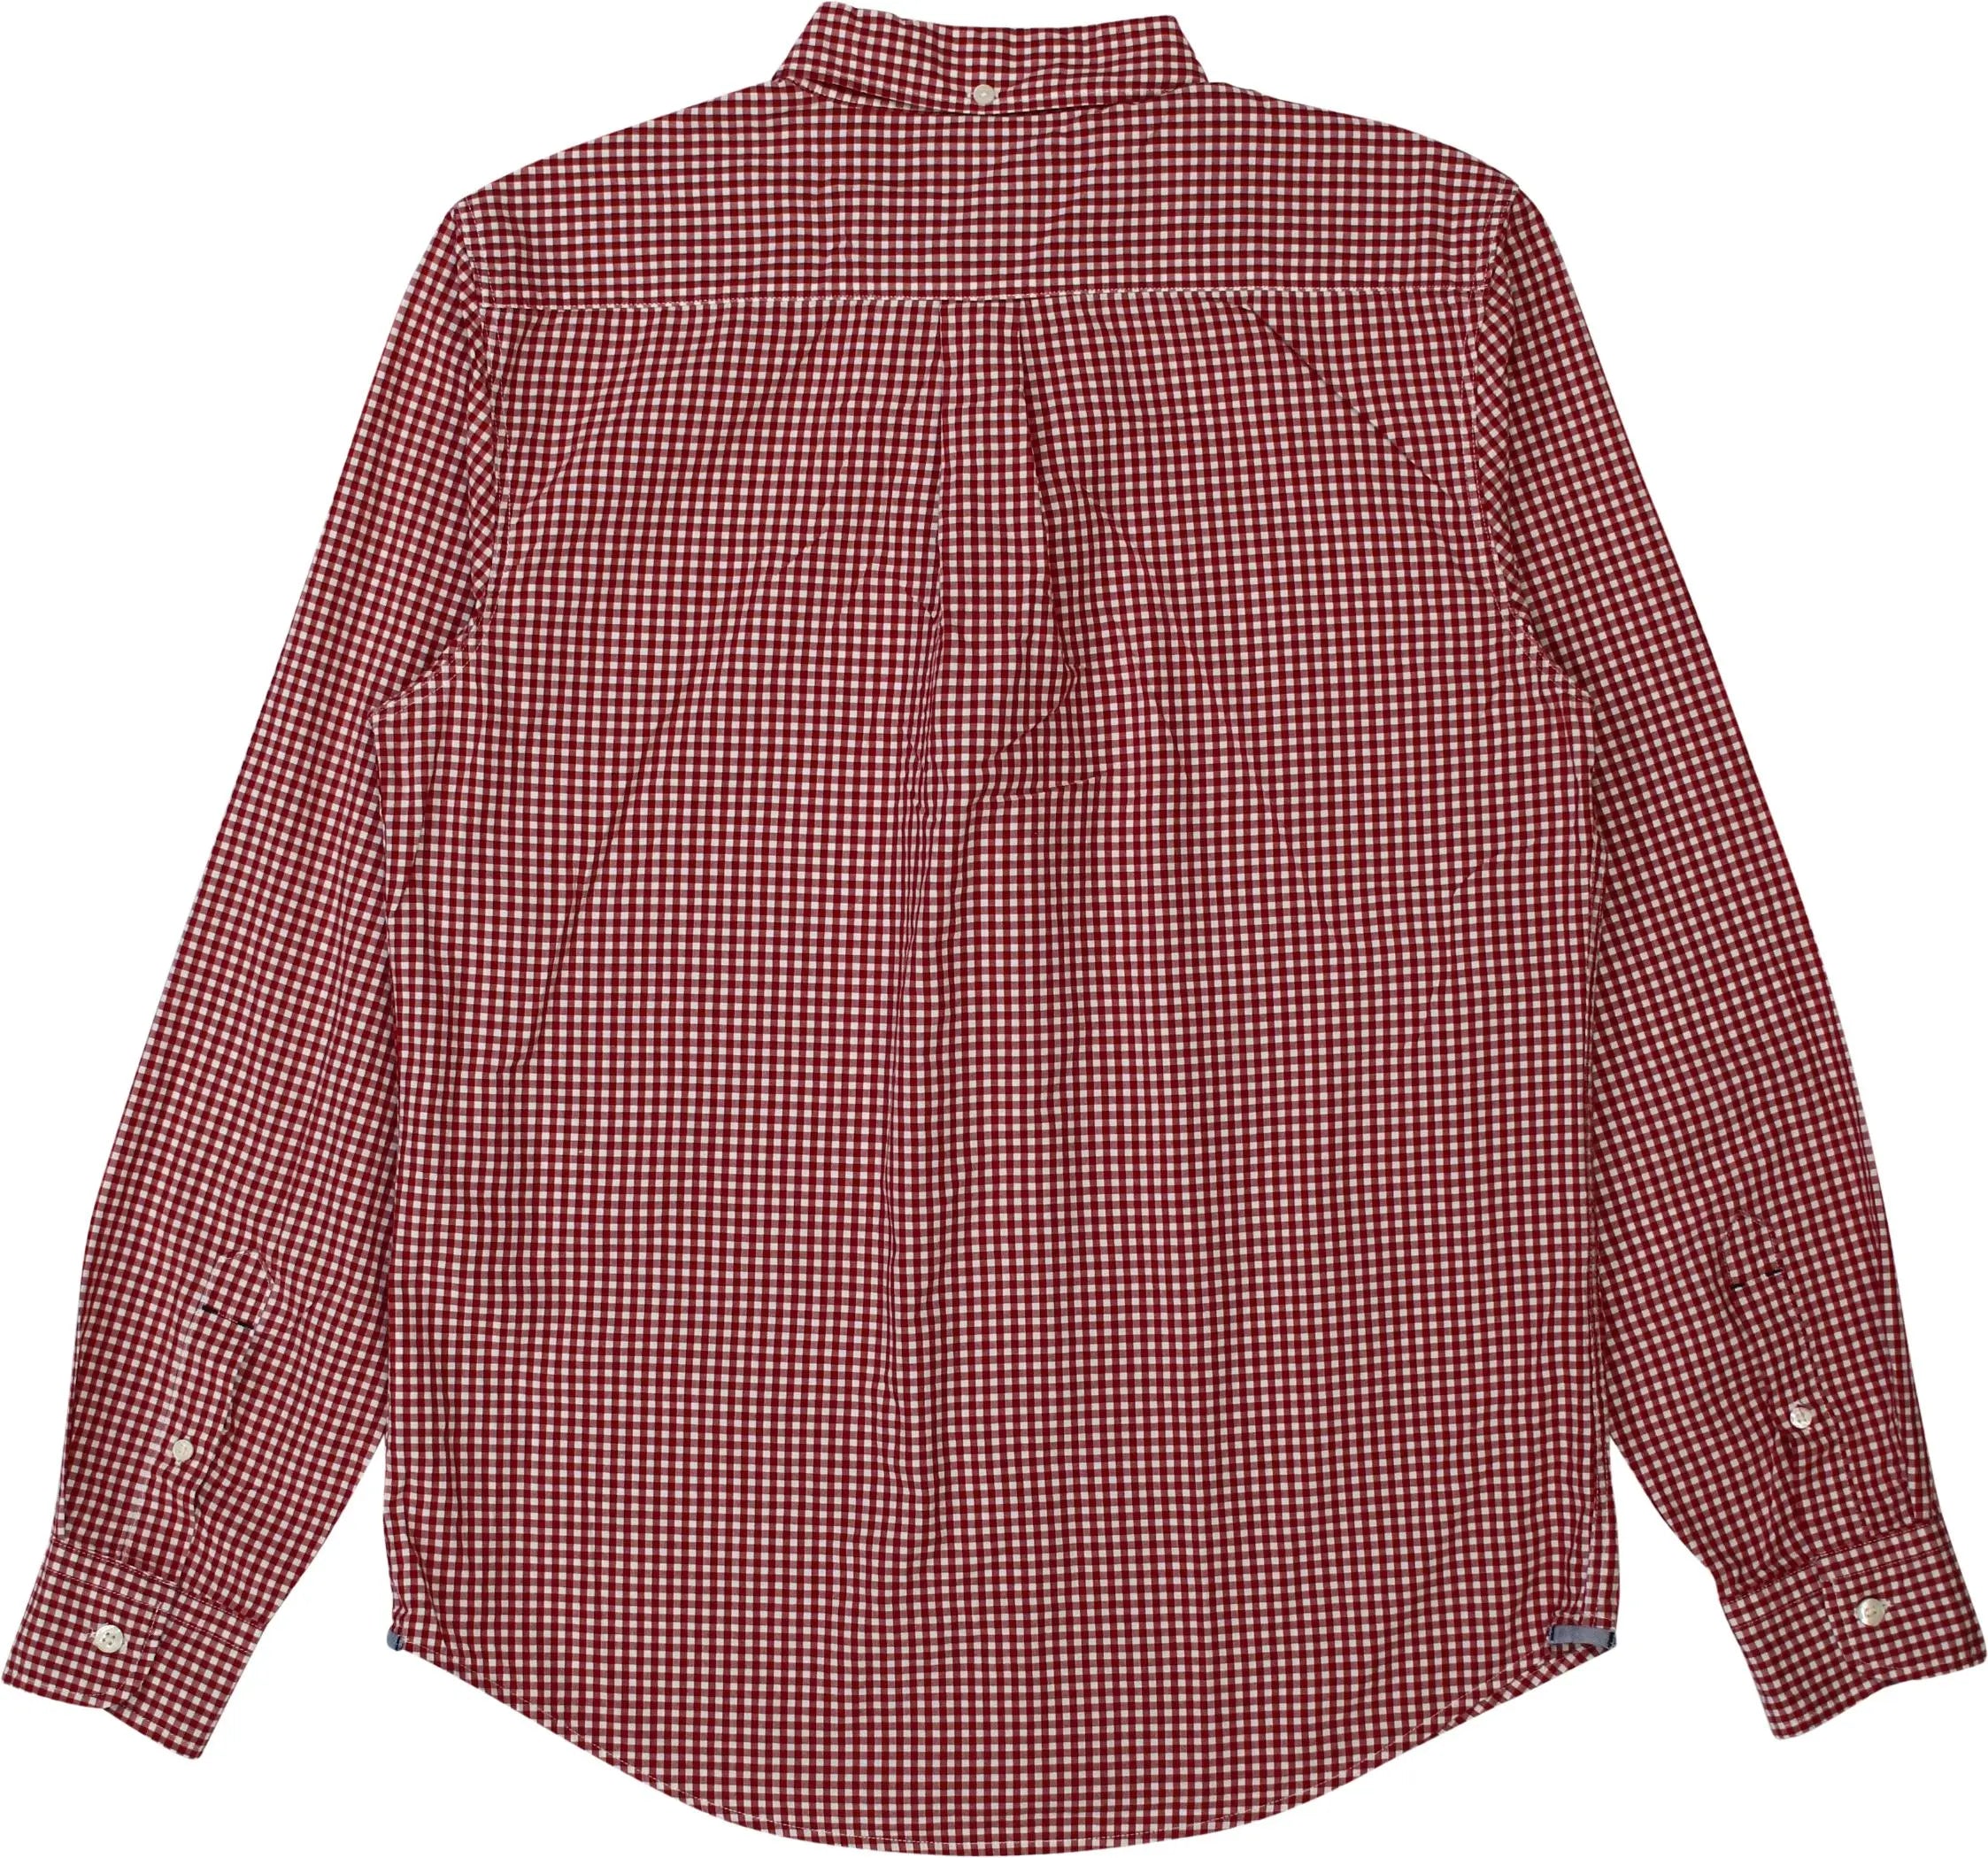 Levi's - Red Checked Shirt by Levi's- ThriftTale.com - Vintage and second handclothing